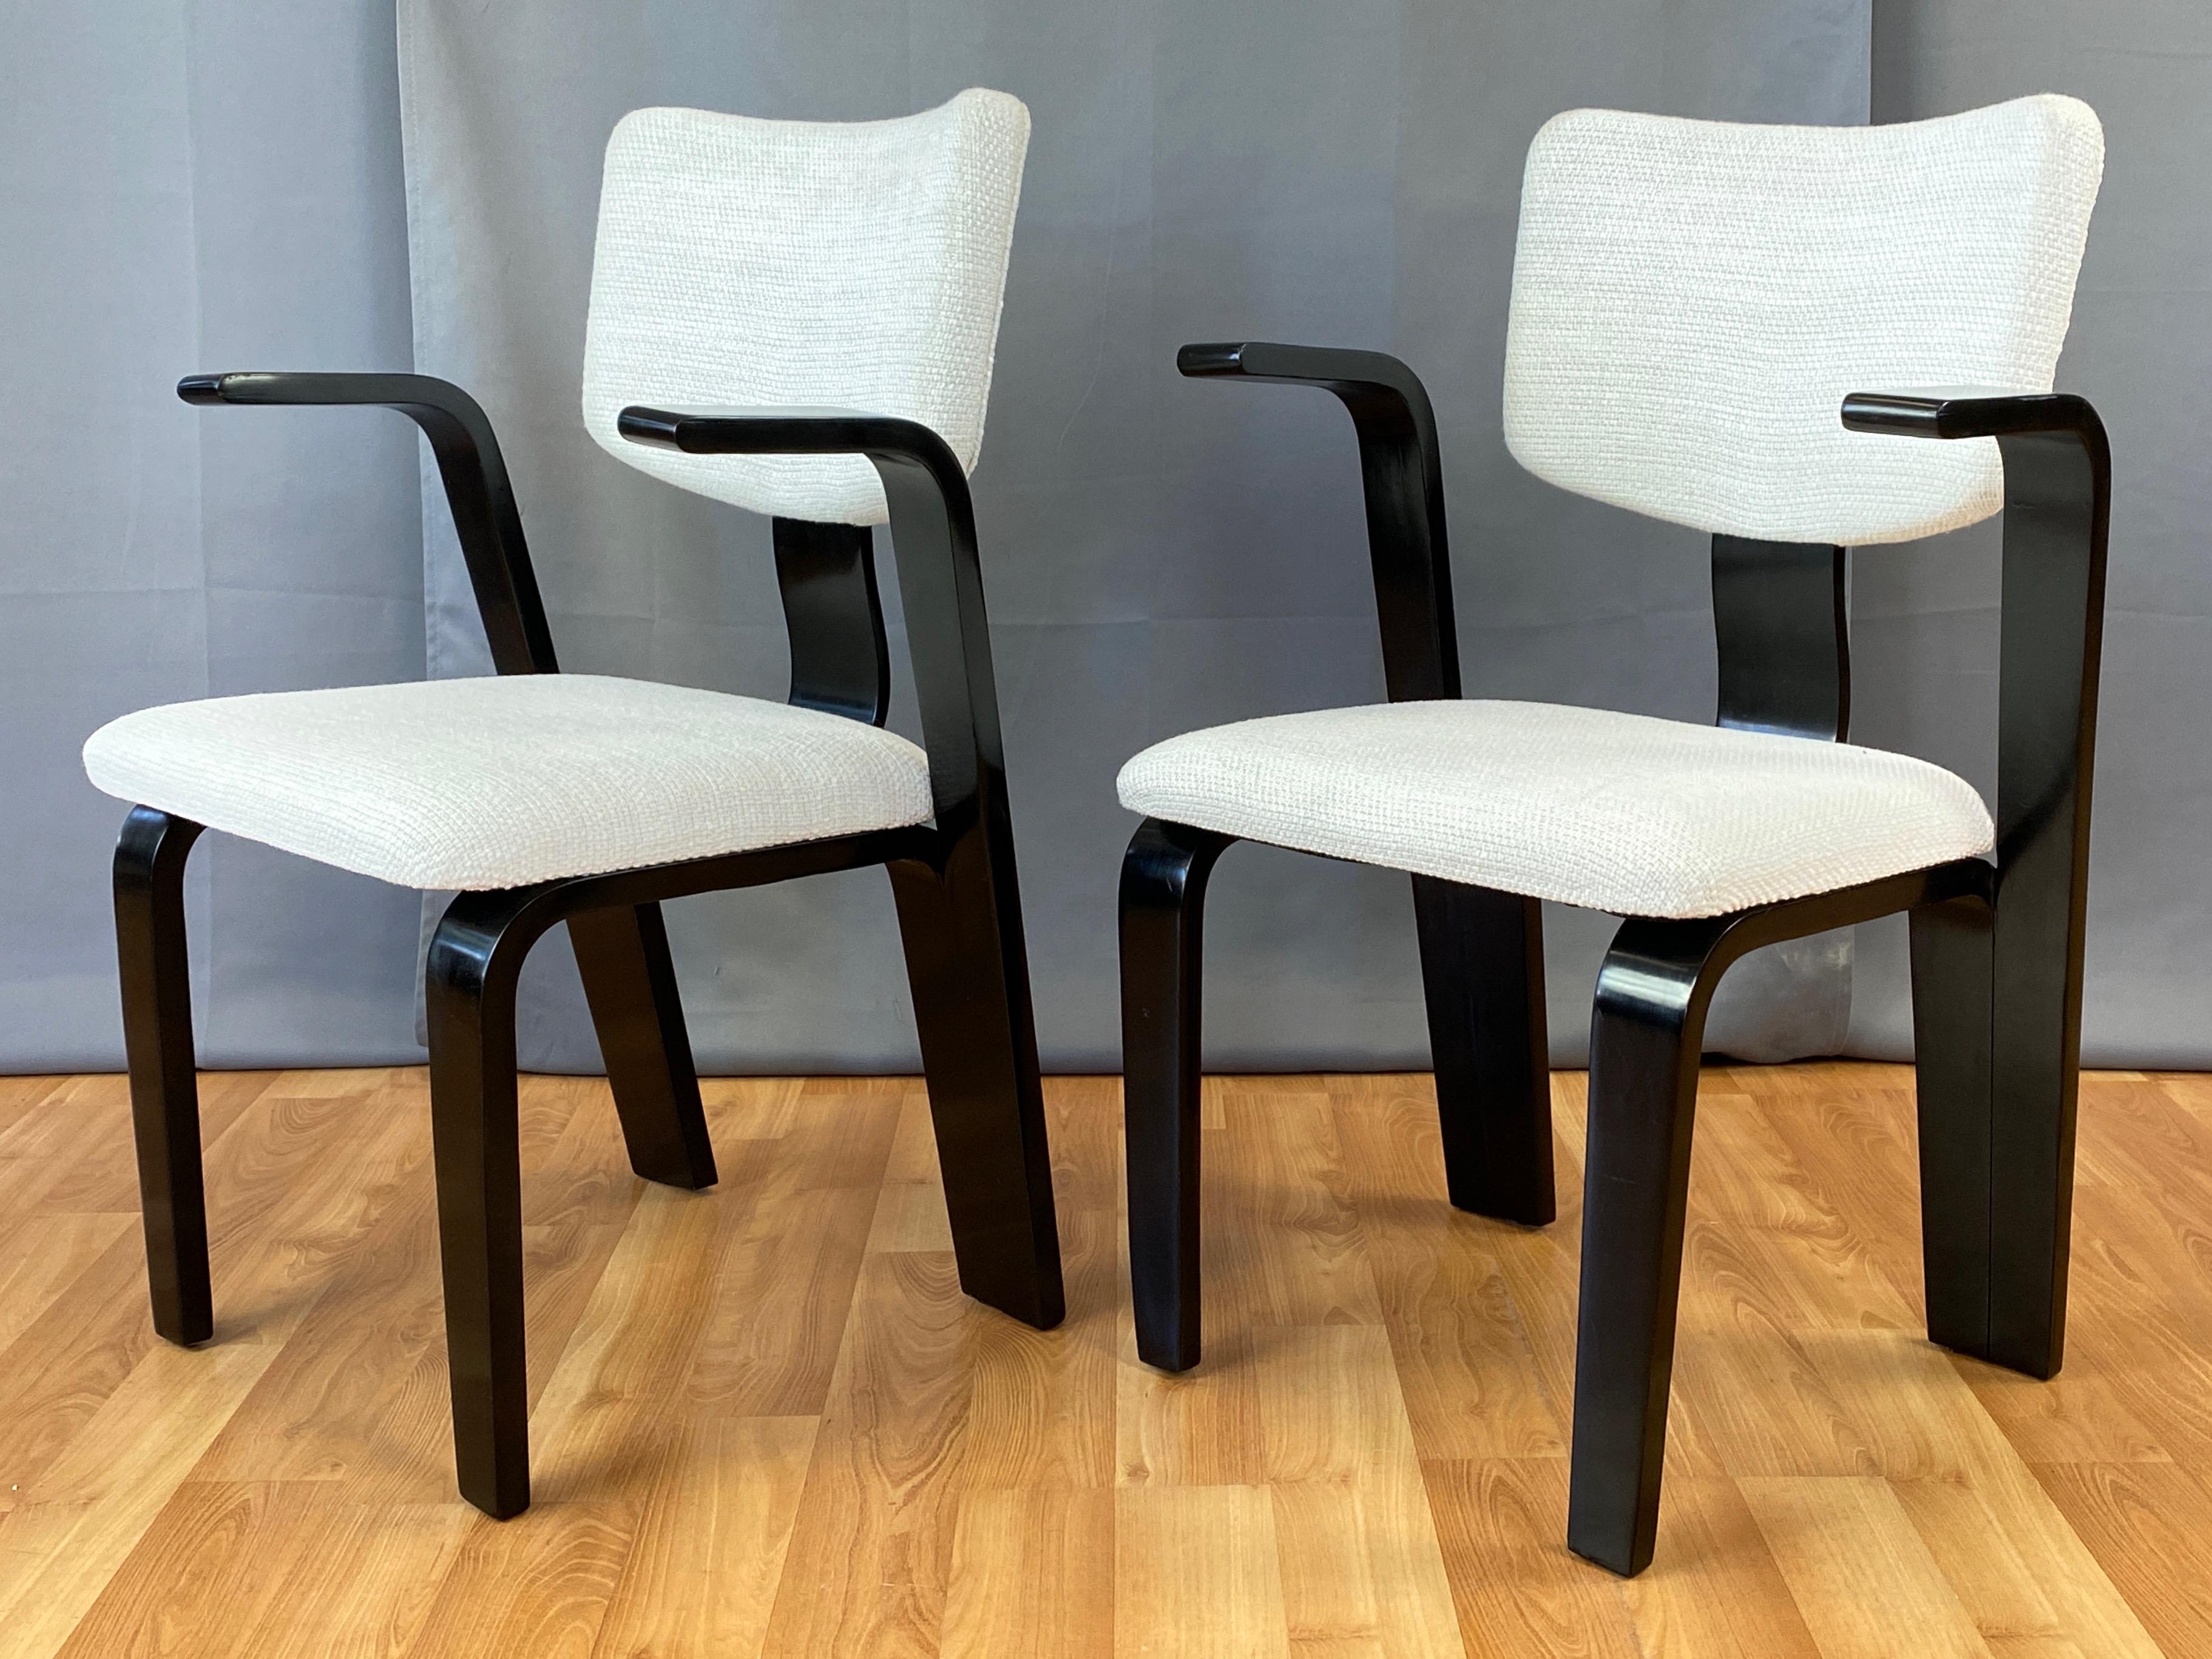 A very dapper pair of uncommon 1940s Thonet bentwood birch armchairs with freshly redone black lacquered finish and white upholstery.

Handsomely crafted frame of flat bentwood elements distinguished by cantilevered arms that split off from the